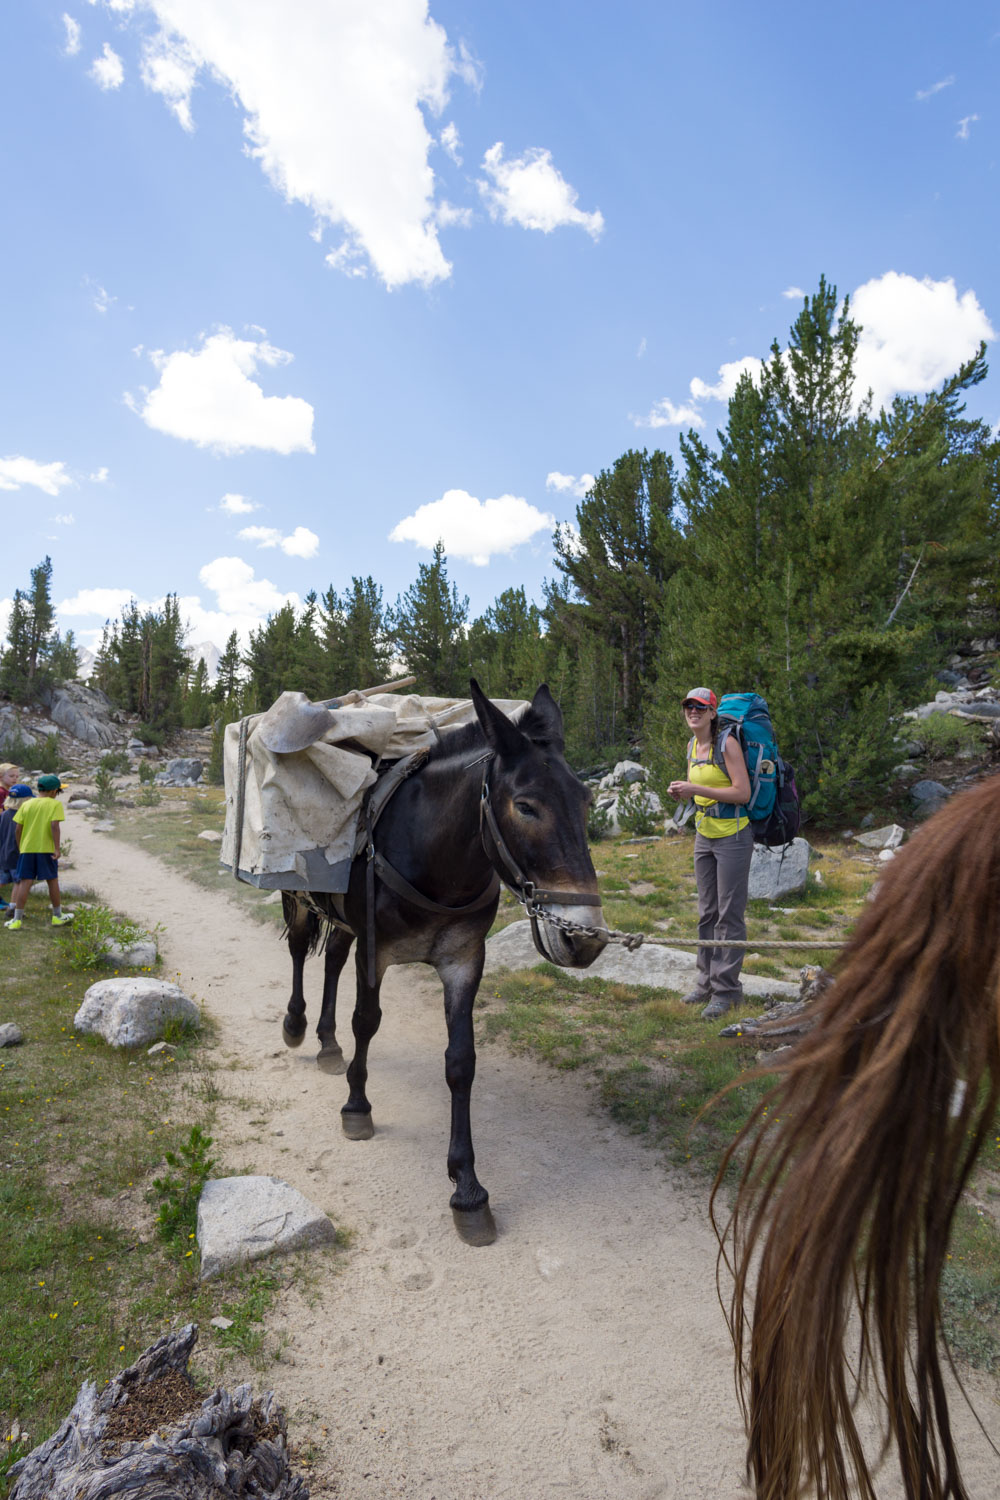 Pack mules on the earlier portions of the trail